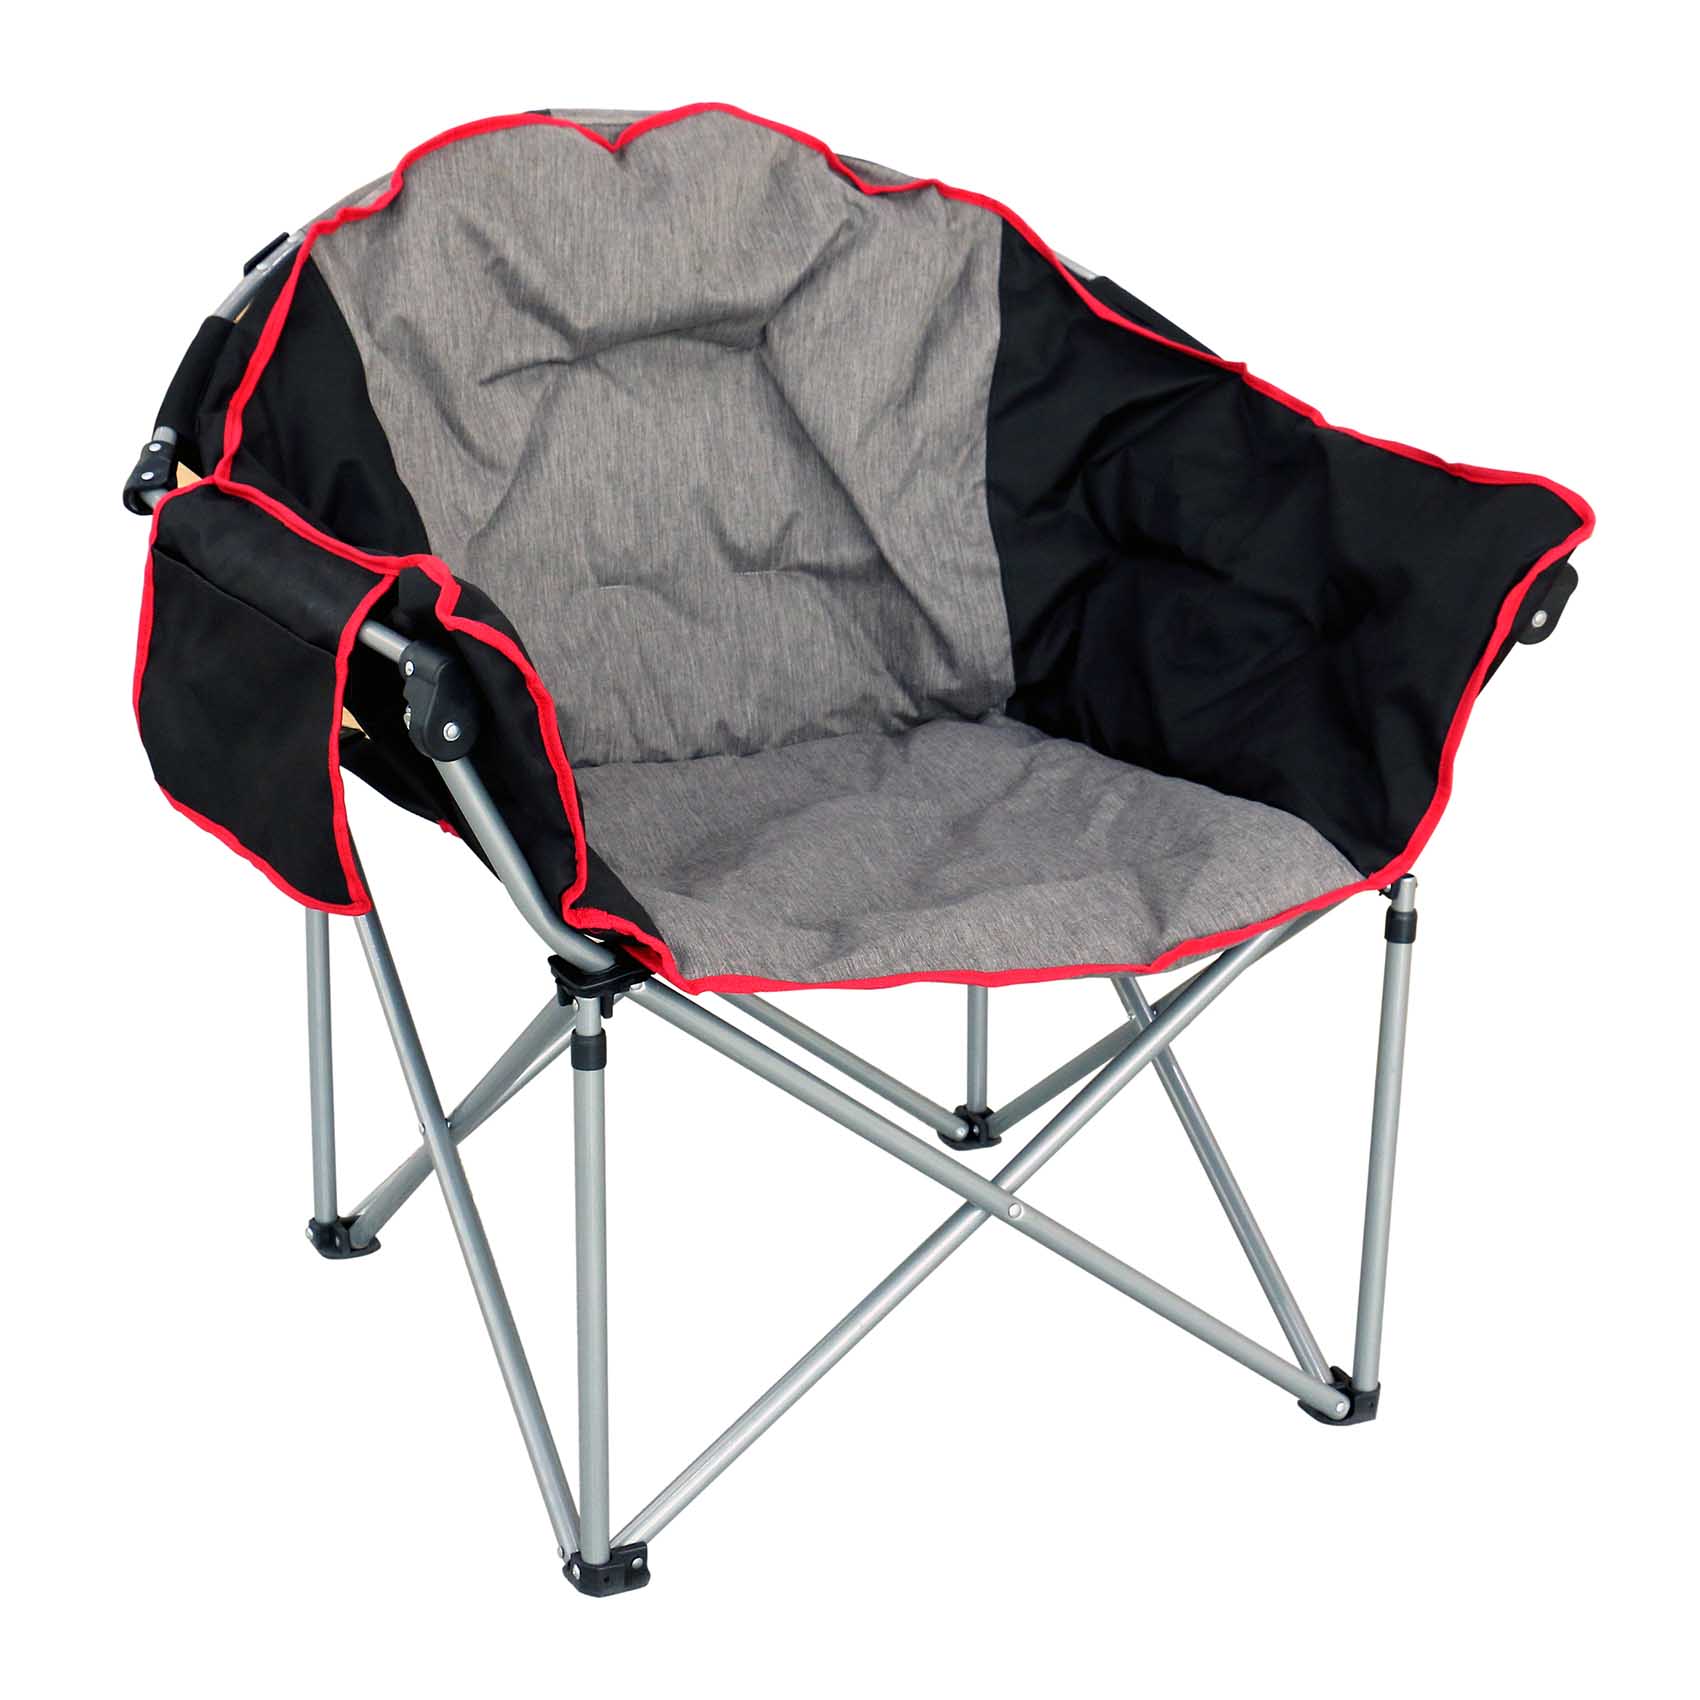 CAMPMATE HALF MOON CHAIR with side bag CM1959 FOLDABLE CAMPING CHAIR BEACH CHAIR OUTDOOR PATIO